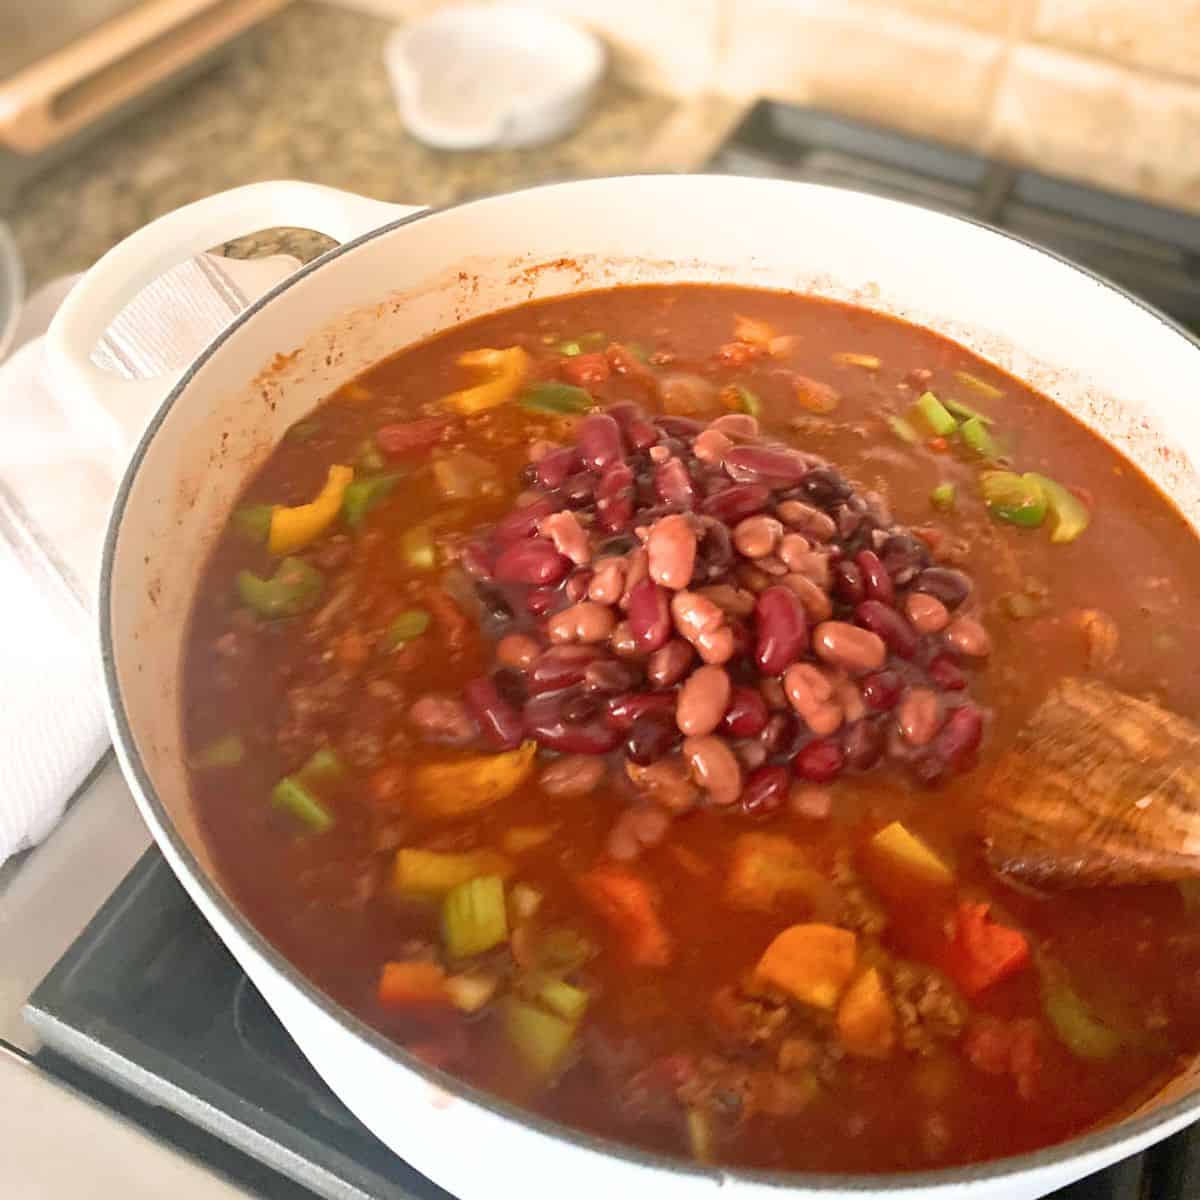 Added beans to chili on stove